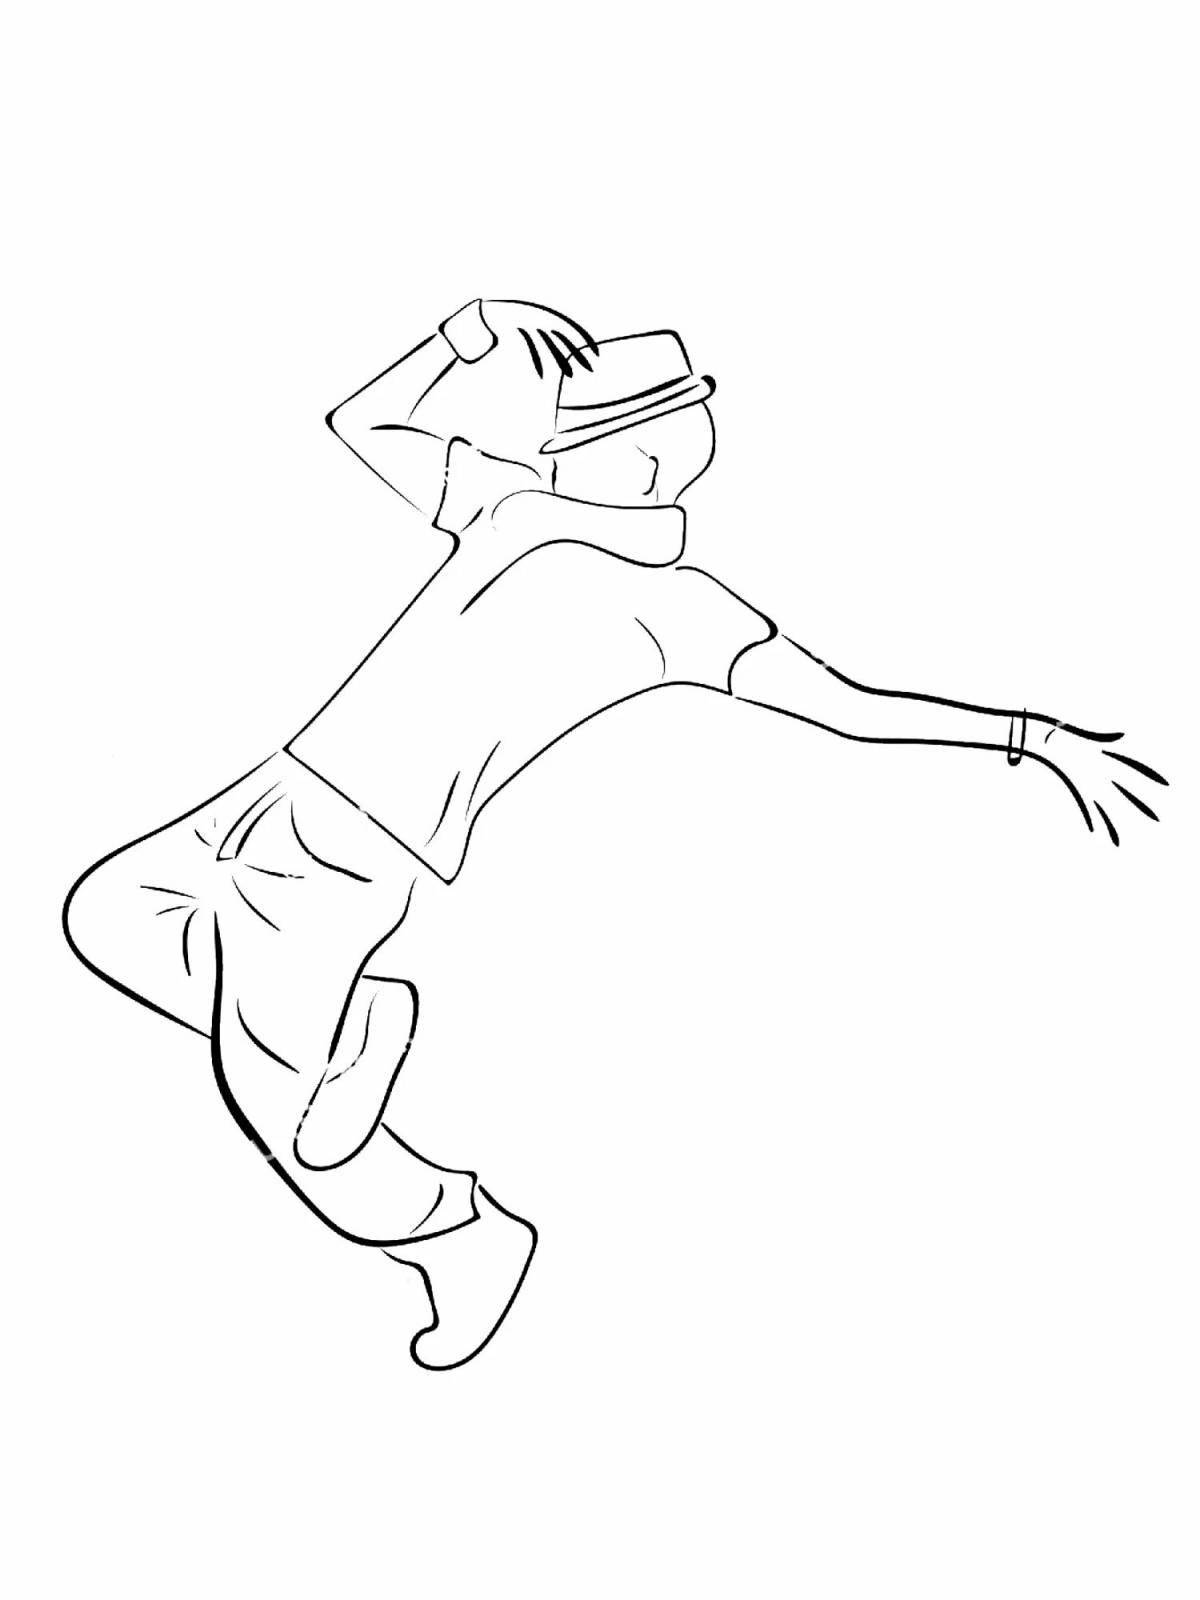 Animated brakedance coloring page